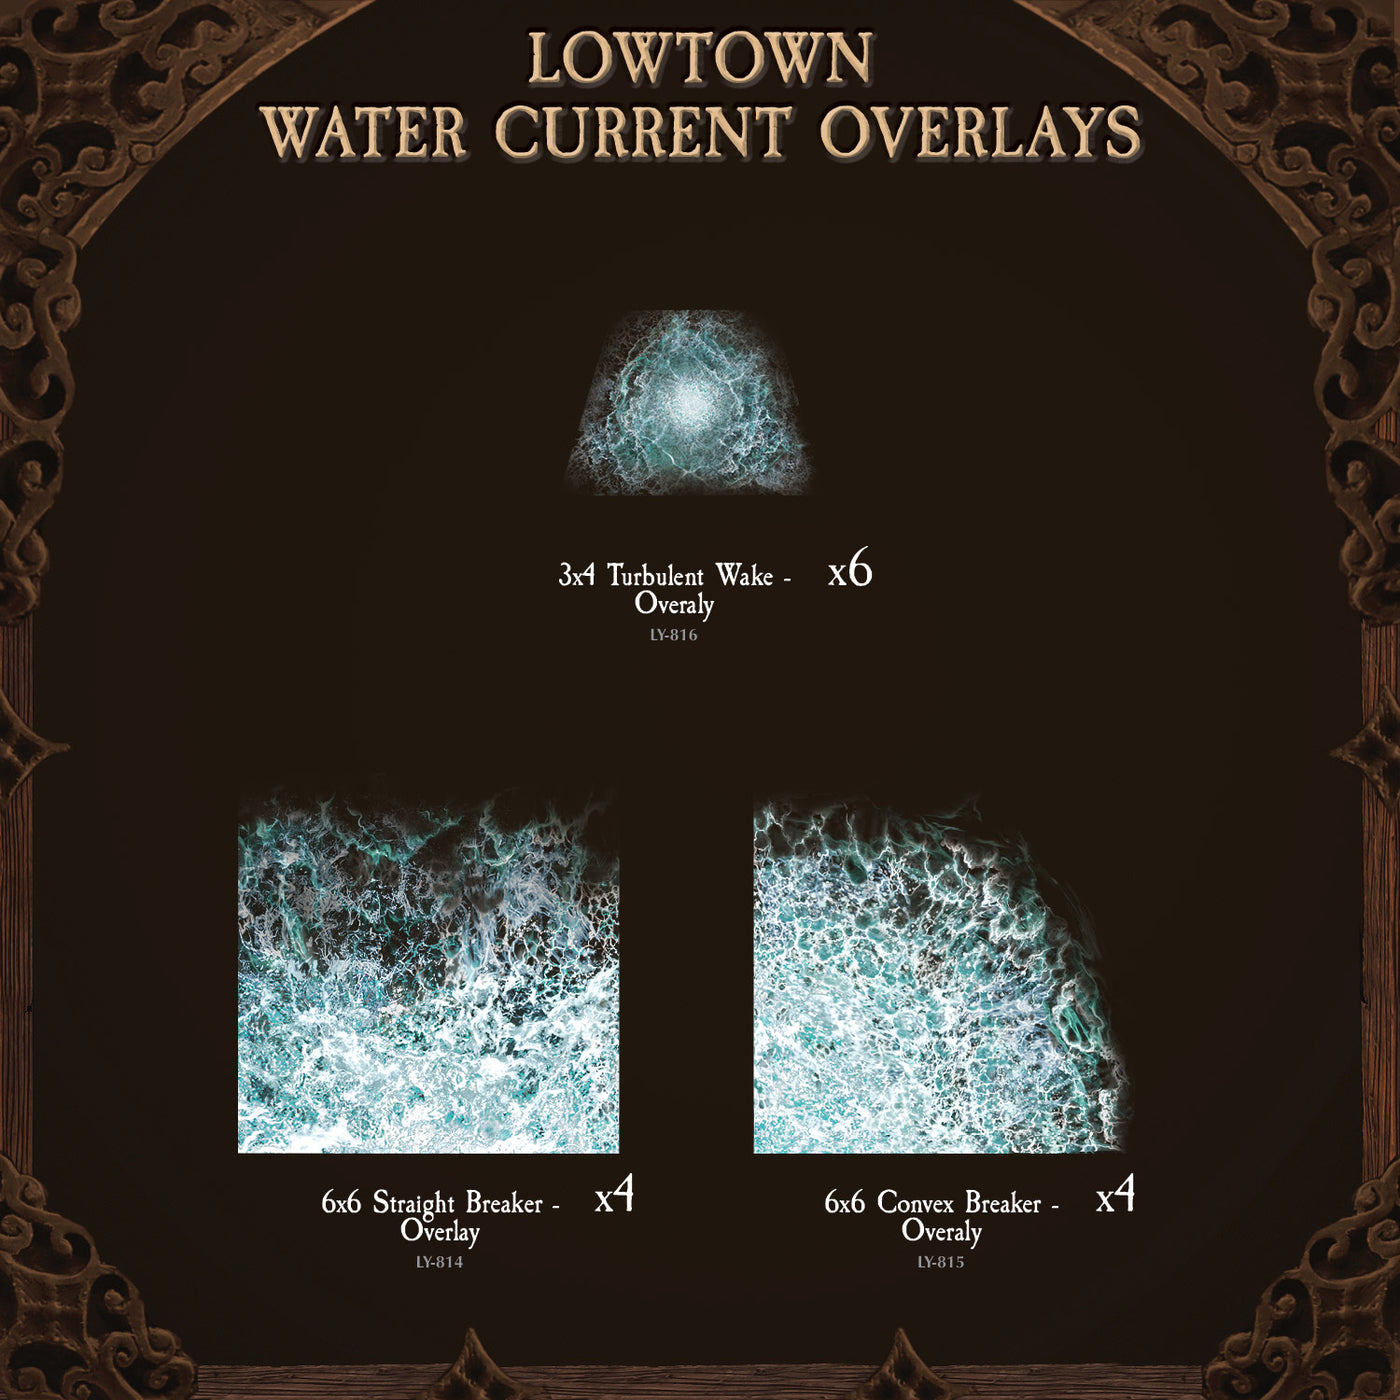 Lowtown Water Current Overlays